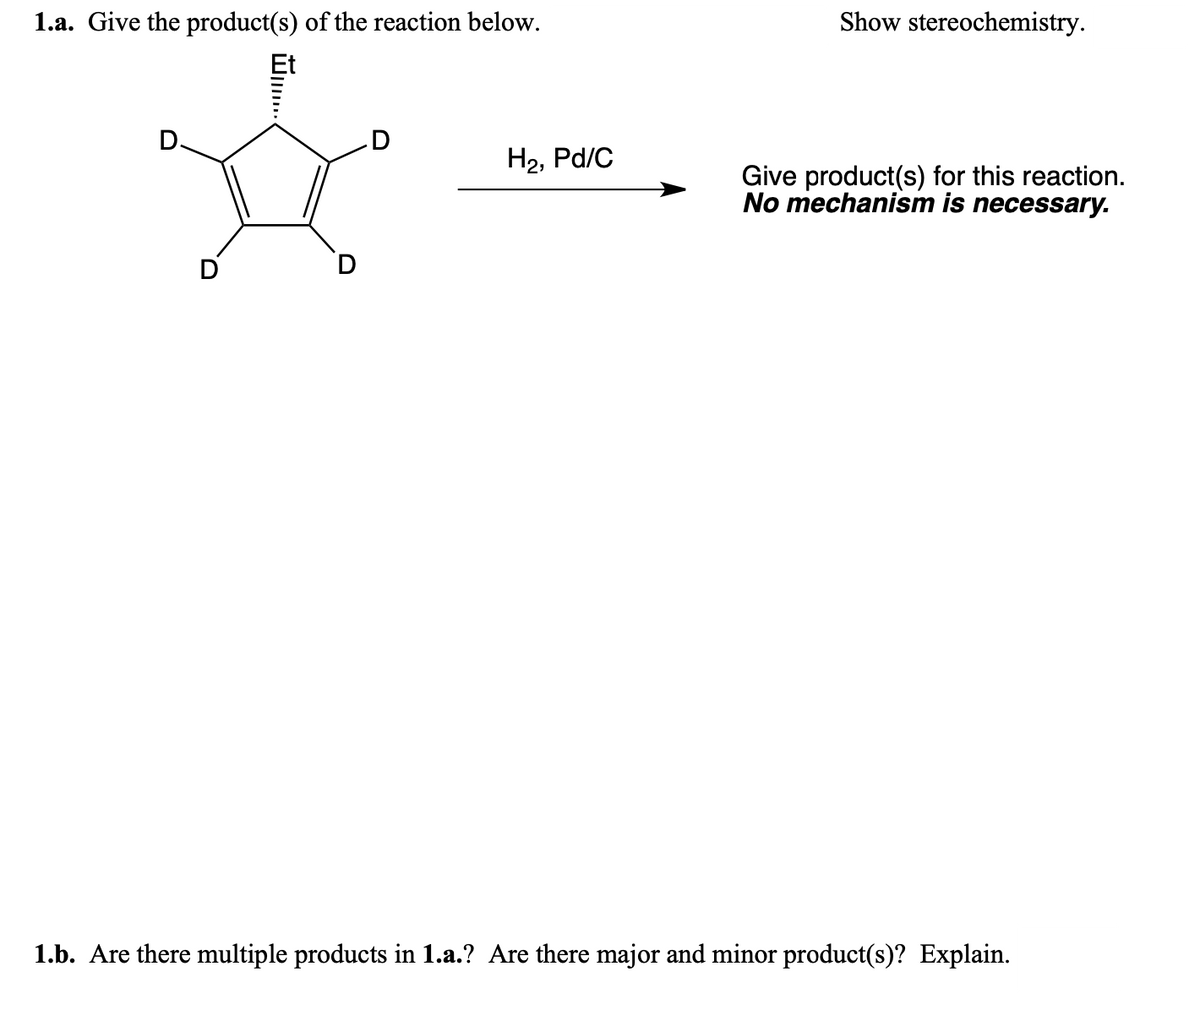 1.a. Give the product(s) of the reaction below.
…......
D
H₂, Pd/C
Show stereochemistry.
Give product(s) for this reaction.
No mechanism is necessary.
1.b. Are there multiple products in 1.a.? Are there major and minor product(s)? Explain.